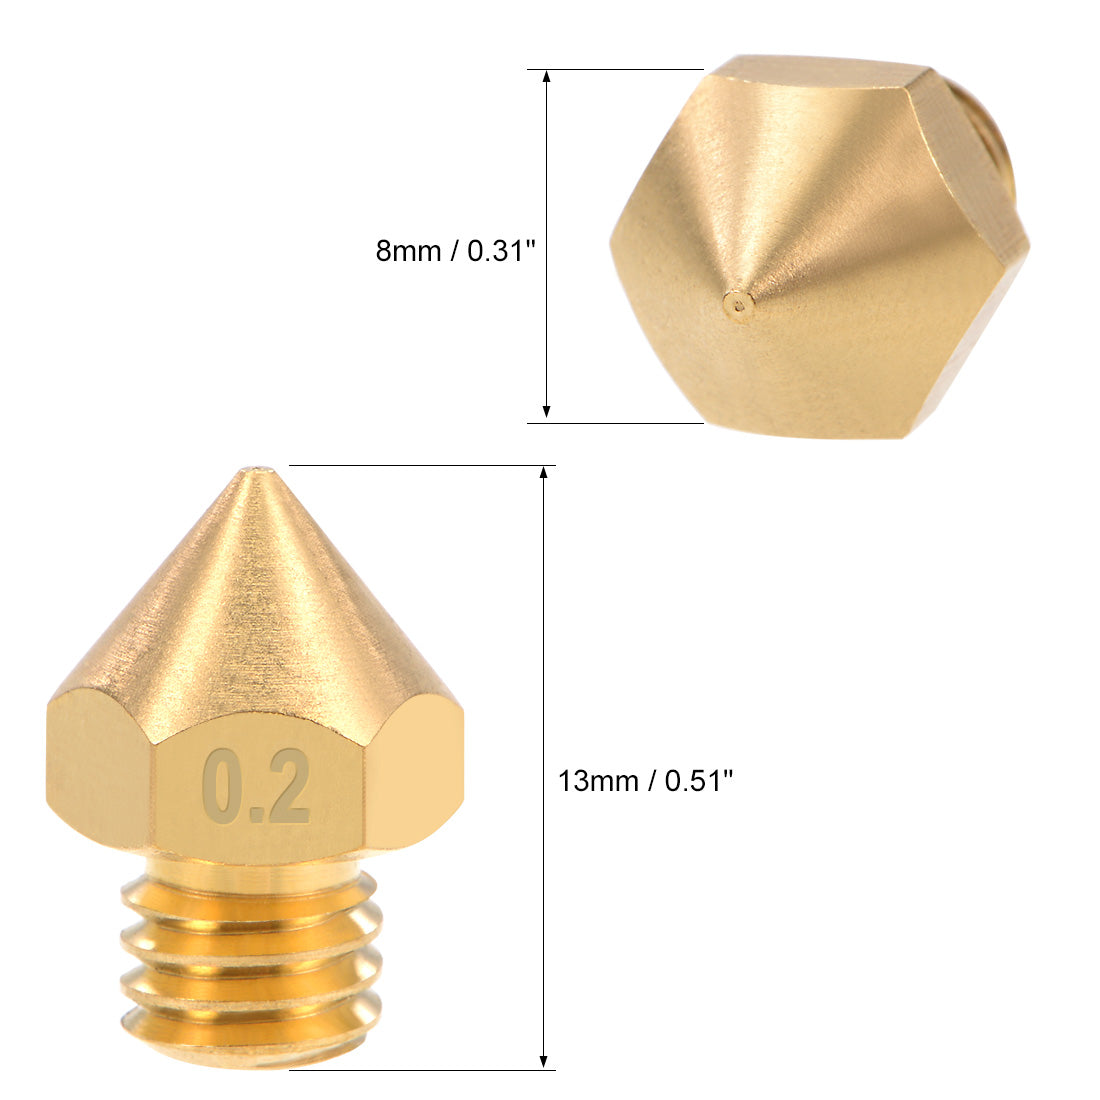 uxcell Uxcell 0.2mm 3D Printer Nozzles Head M6 for MK8 1.75mm Extruder Print, Brass 5pcs